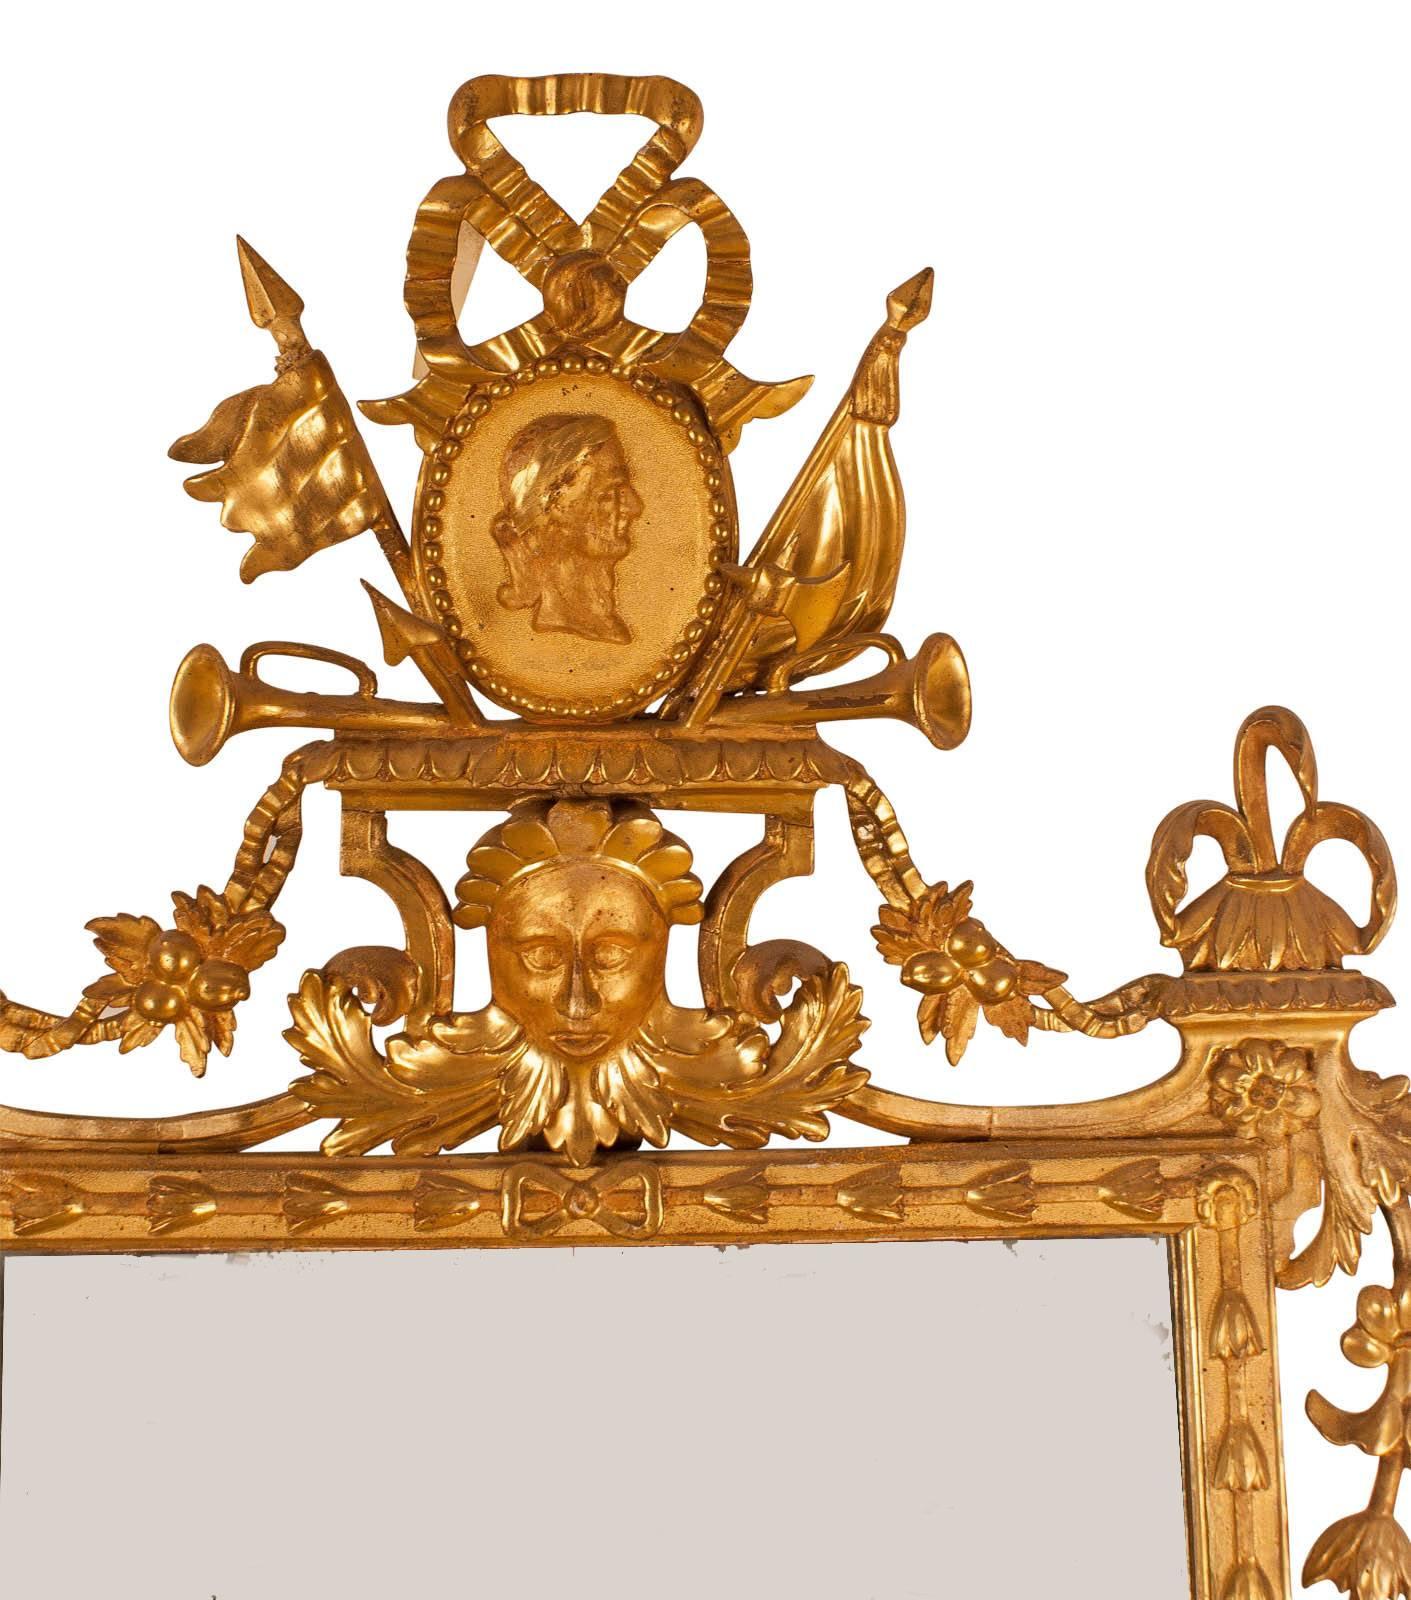 A large and well carved and gilt wood mirror made in Italy, circa 1810. With trophies, swags, urns and masks. Some small repairs to gilding, plate later. A wonderful large and decorative mirror.